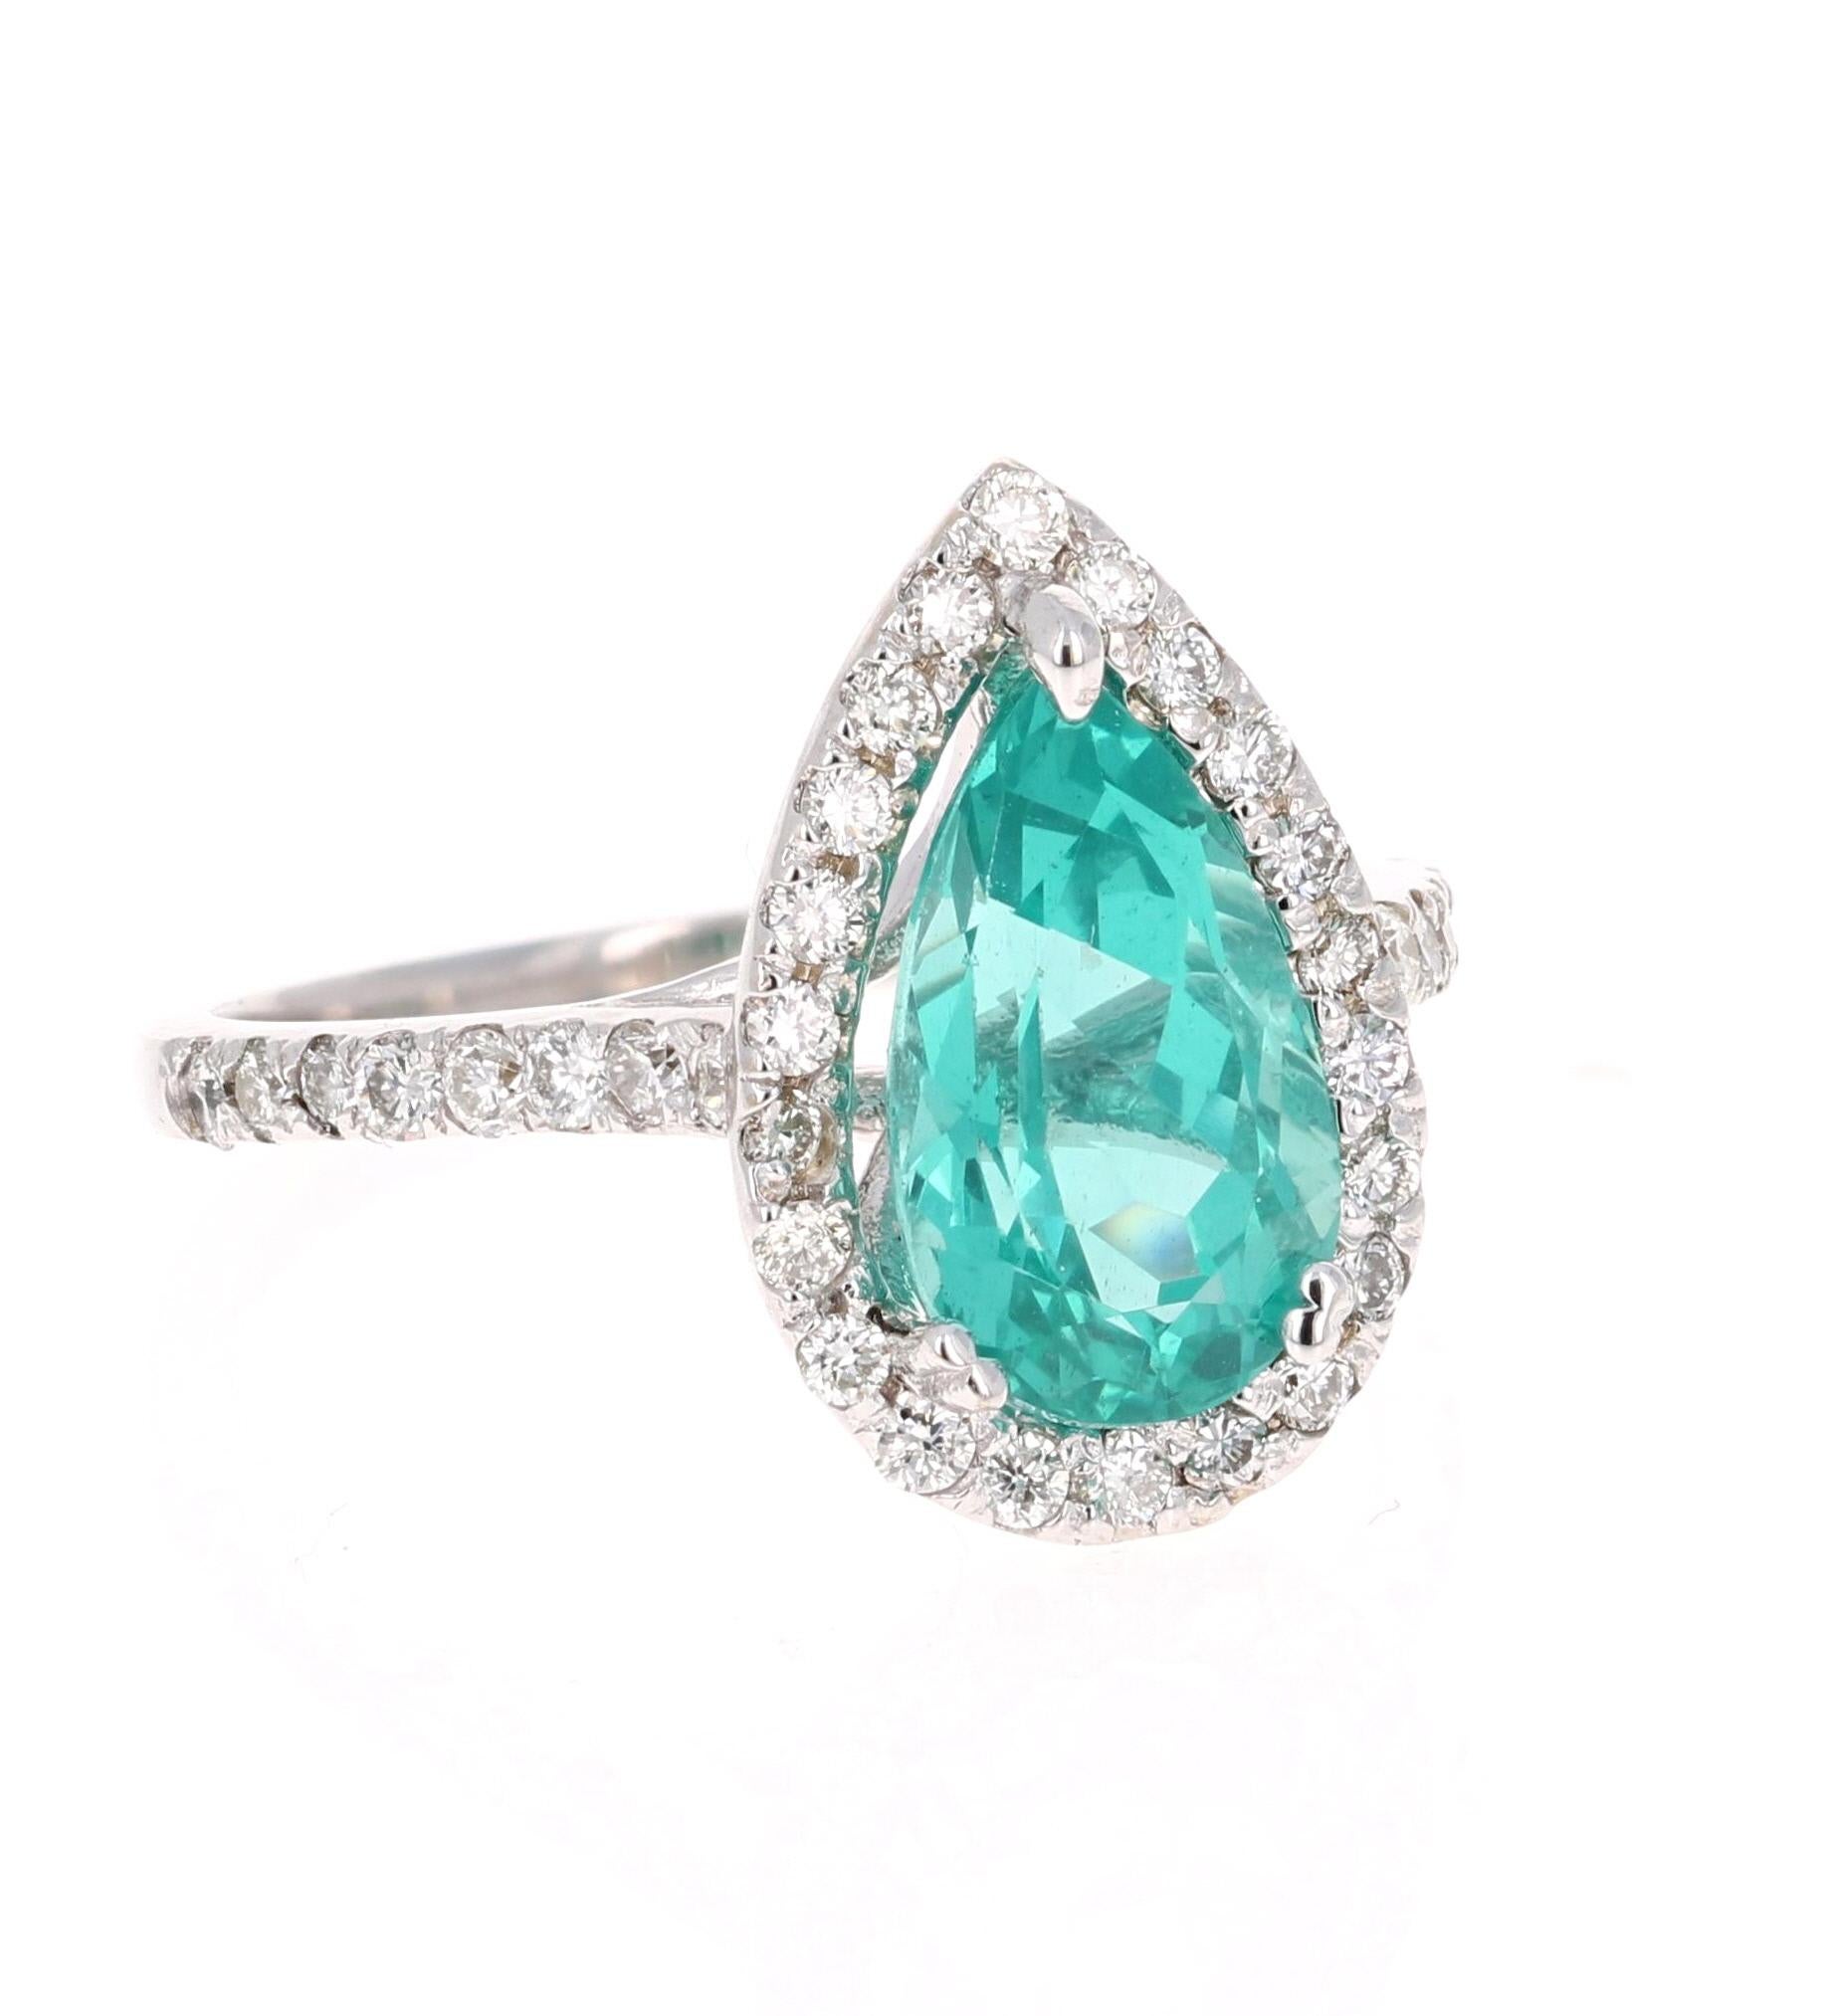 Gorgeous Halo Apatite and Diamond Ring.  This ring has a 2.89 Carat Pear Cut Apatite in the center of the ring and is surrounded by a halo of 36 Round Cut Diamonds that weigh 0.59 carat (Clarity: SI2, Color:F).  The total carat weight of the ring is